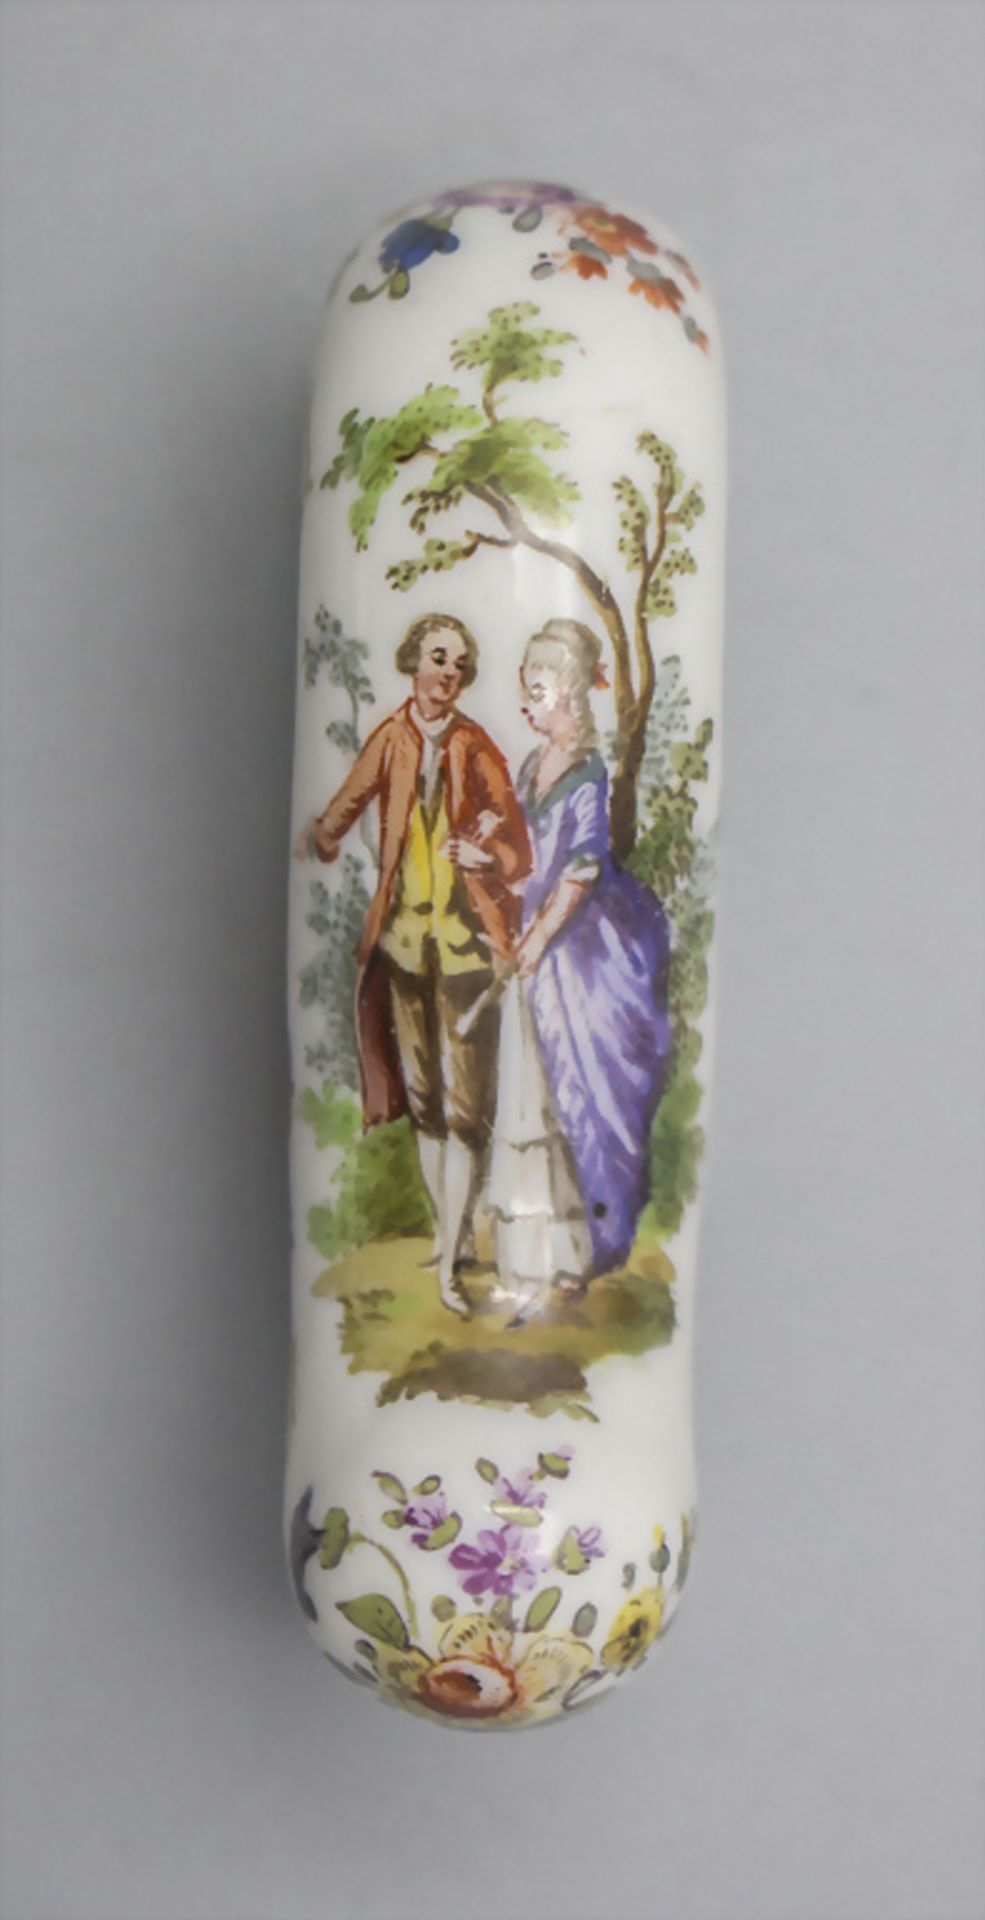 Stockgriff mit Watteauszene / A cane handle with courting scene, wohl Meissen, 19. Jh. - Image 2 of 4